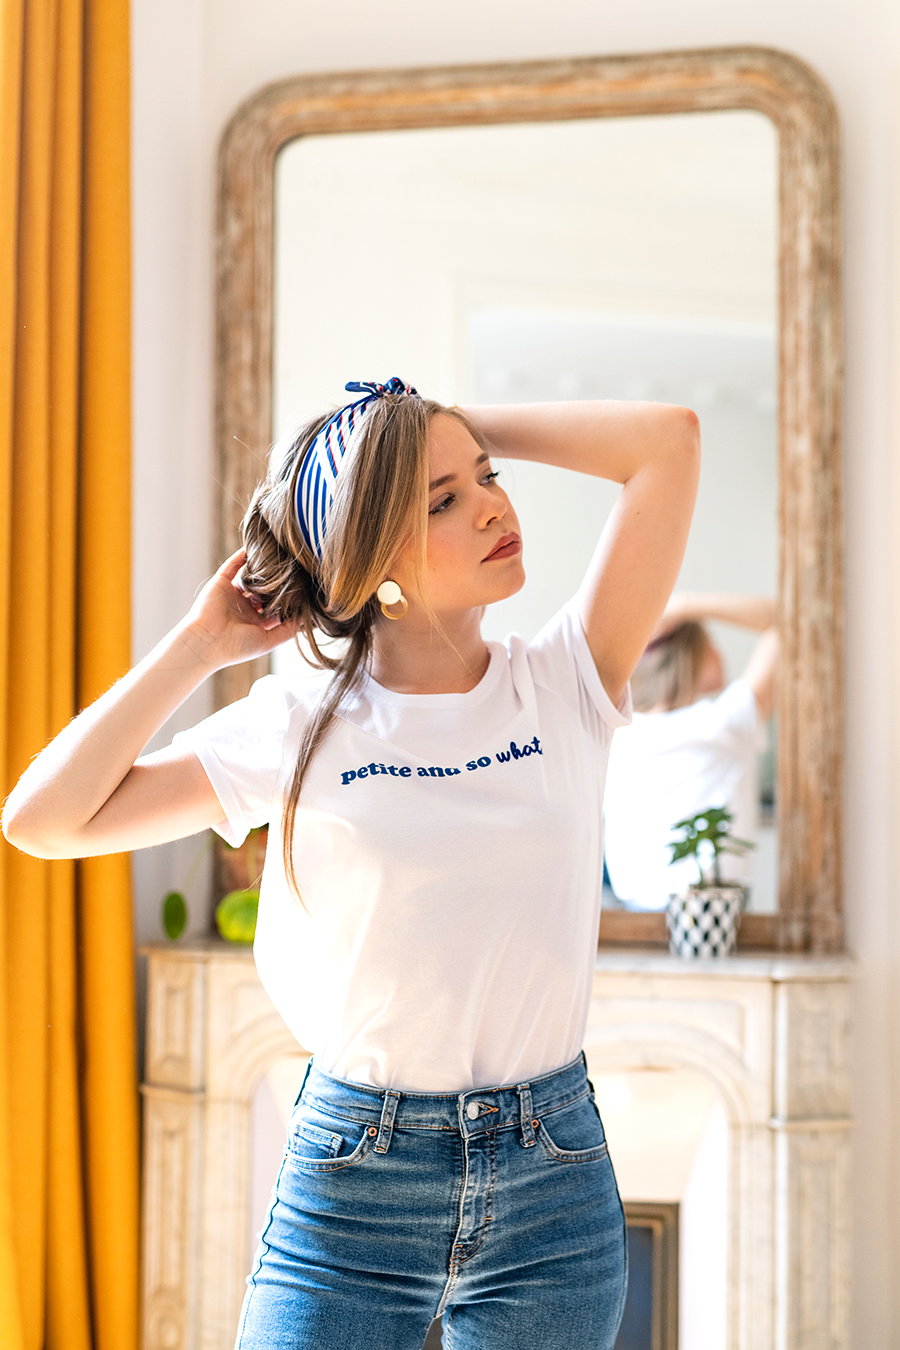 petite-and-so-what-tee-shirt-message-femme-petite-taille